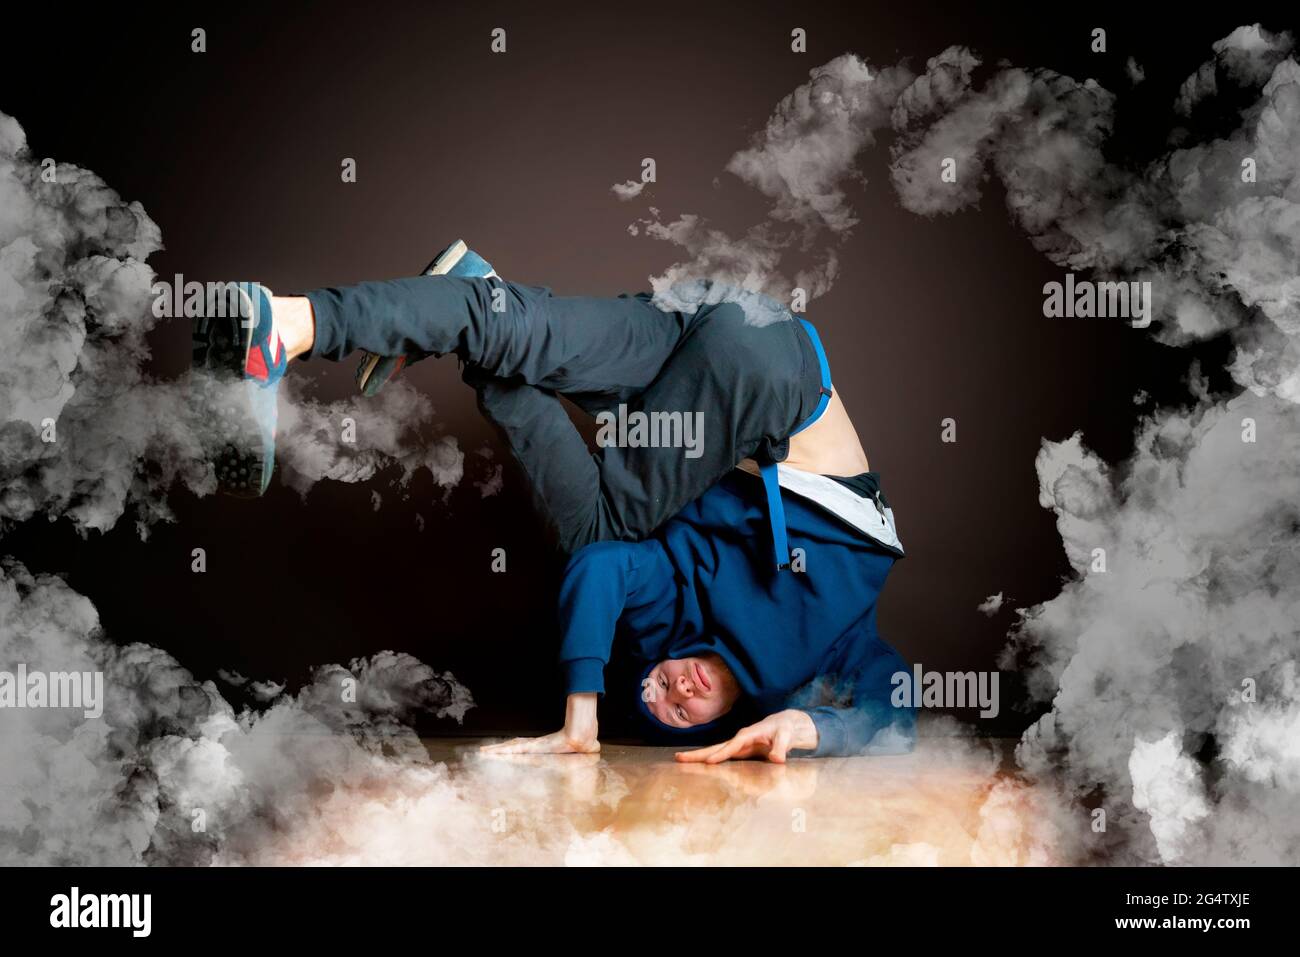 Break Dance Stage High Resolution Stock Photography and Images - Alamy